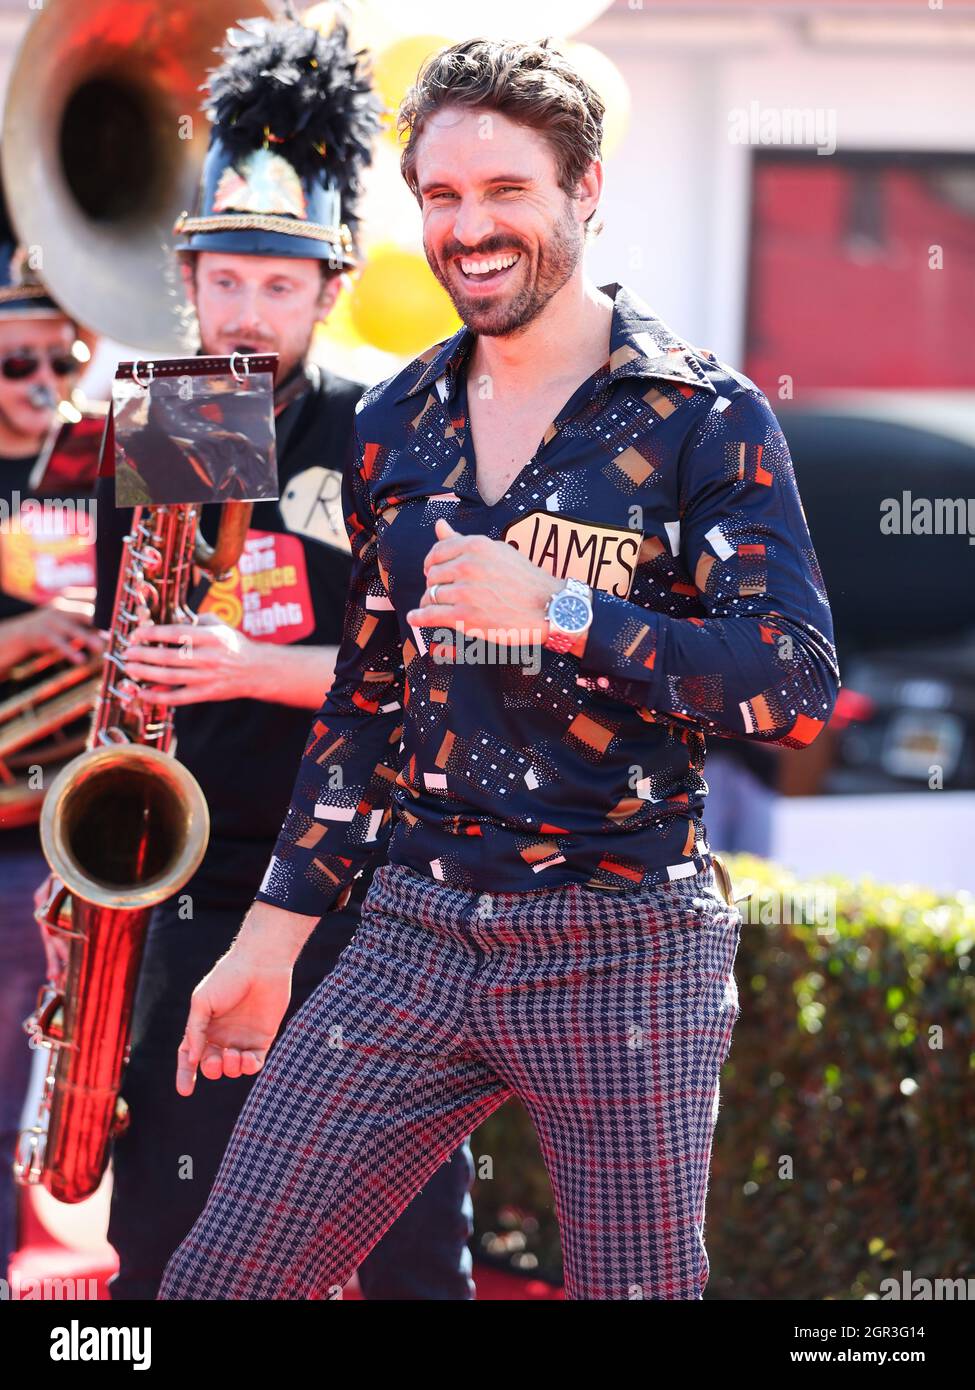 Inglewood, United States. 30th Sep, 2021. INGLEWOOD, LOS ANGELES, CALIFORNIA, USA - SEPTEMBER 30: Australian model James O'Halloran attends CBS's 'The Price Is Right' 50th Season Celebration held at Randy's Donuts on September 30, 2021 in Inglewood, Los Angeles, California, United States. (Photo by Xavier Collin/Image Press Agency/Sipa USA) Credit: Sipa USA/Alamy Live News Stock Photo